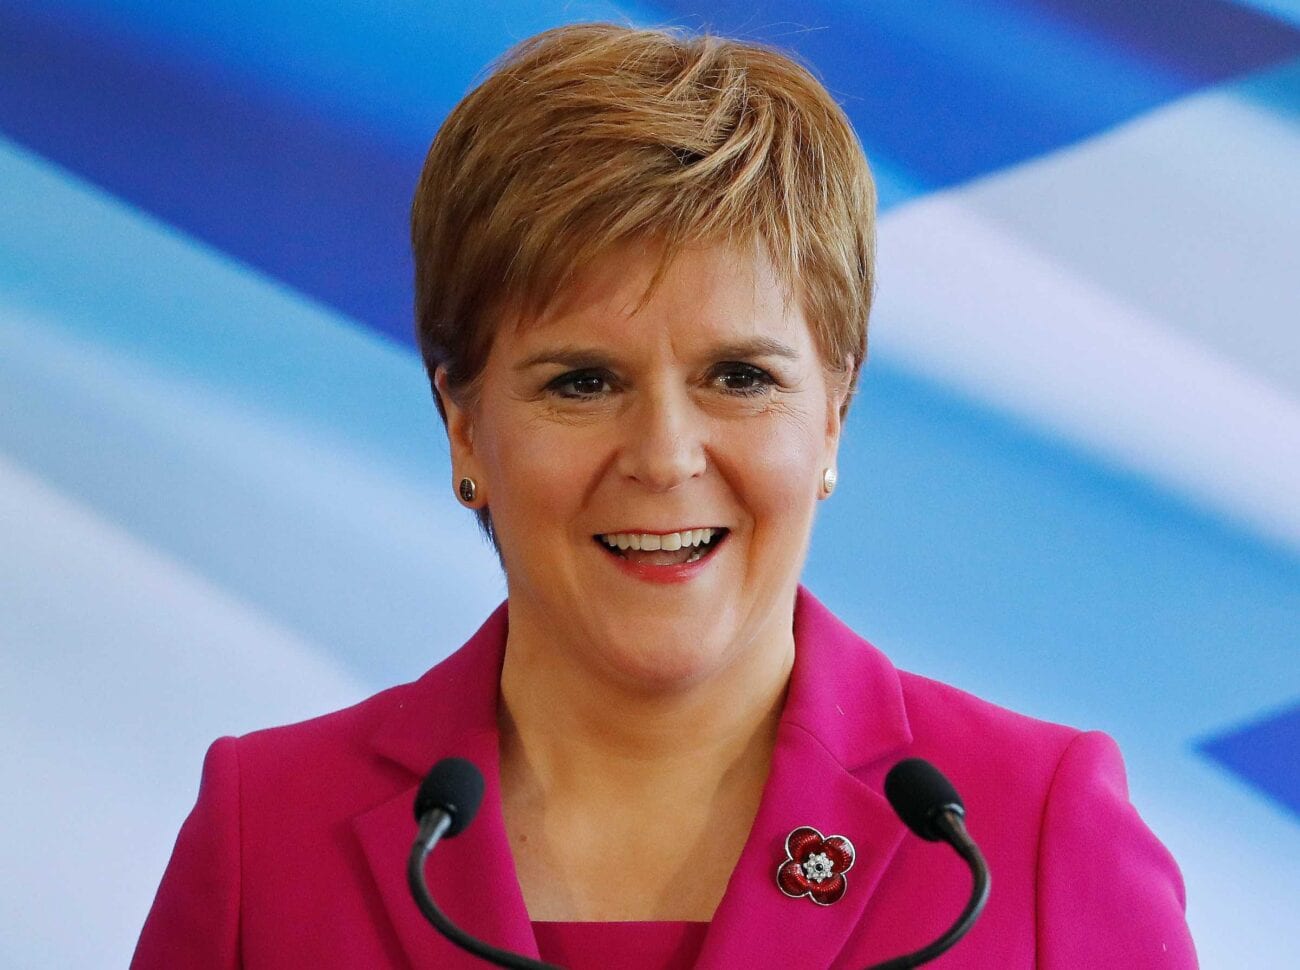 Scotland’s First Minister Nicola Sturgeon is about to put forward a two–week shutdown in the wake of a second wave of coronavirus. Here's what we know.